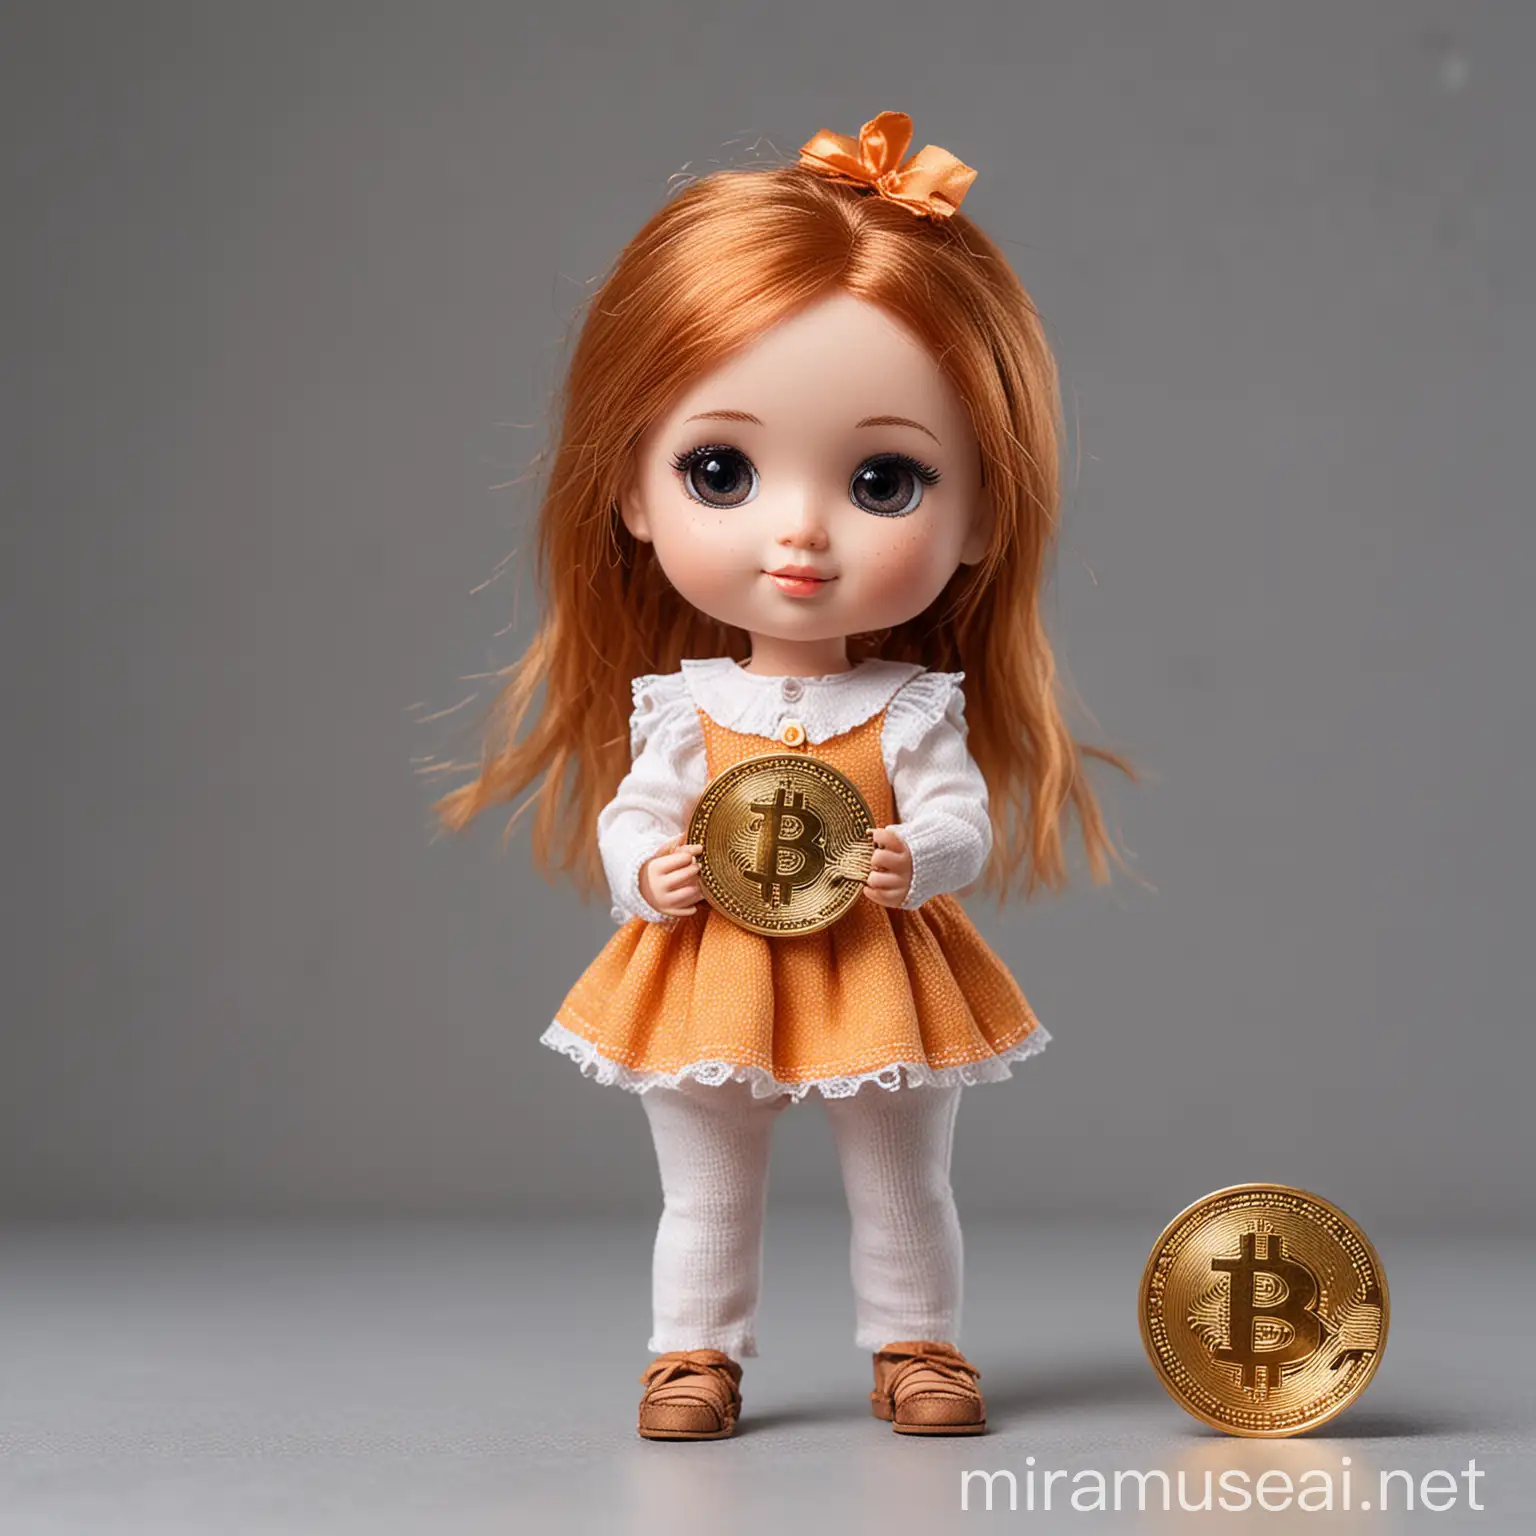 Adorable Doll Holding a Large Bitcoin Coin